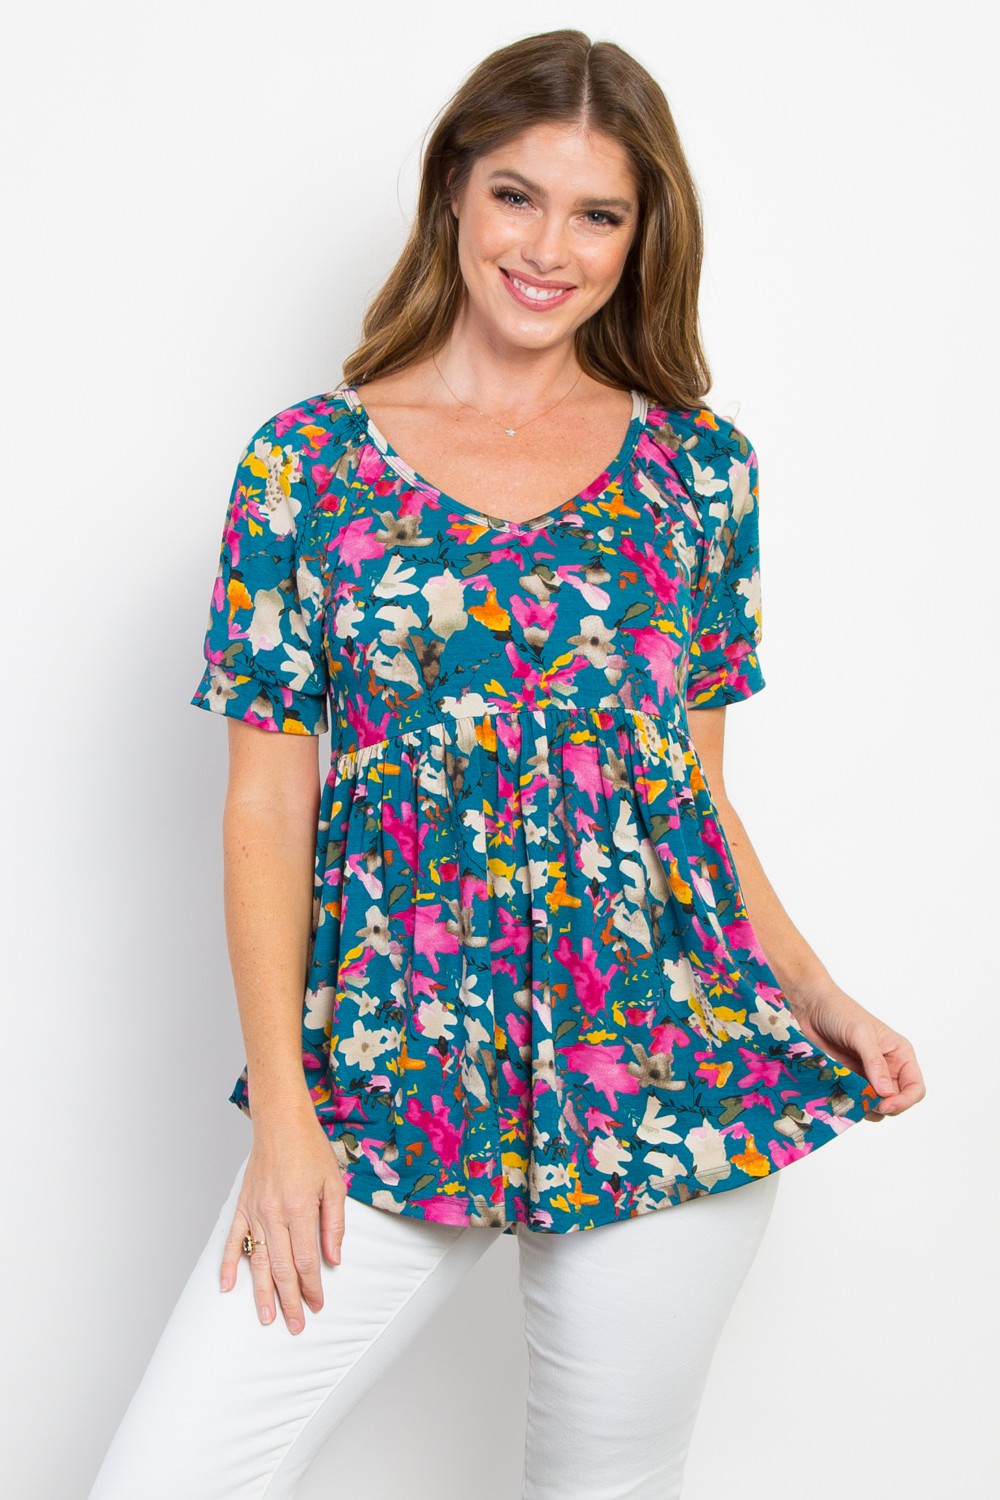 Forever in Florals Babydoll Top in Teal - Curvy